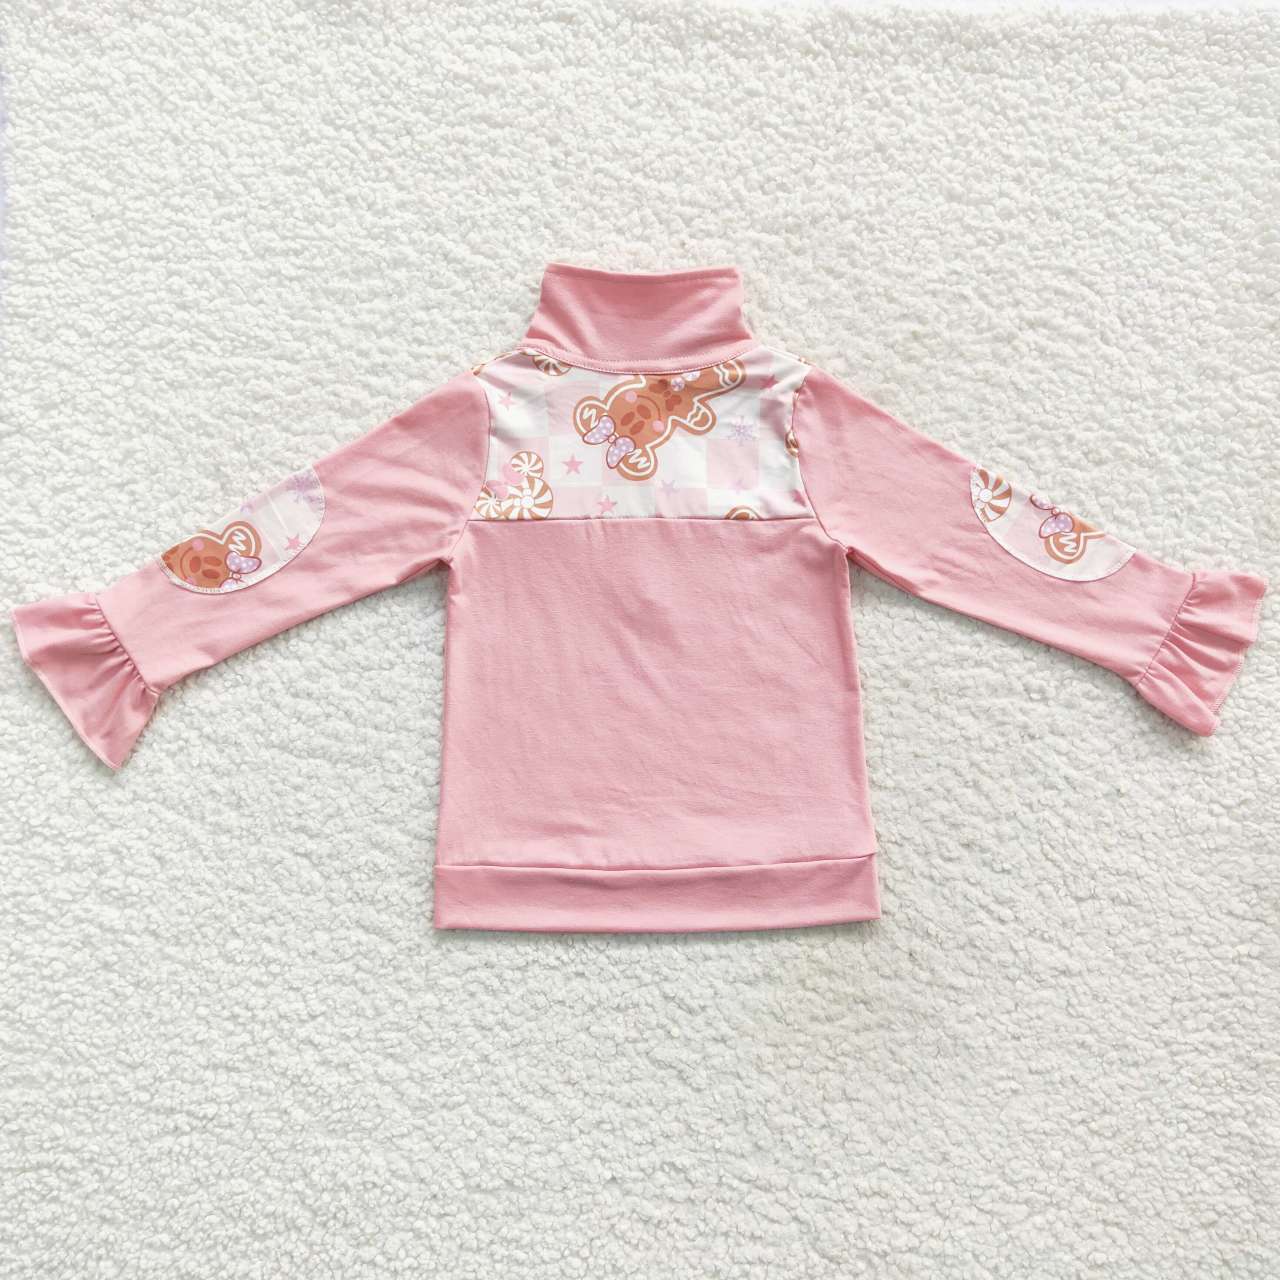 GT0218 Cartoon pink and white zip-up long-sleeved top